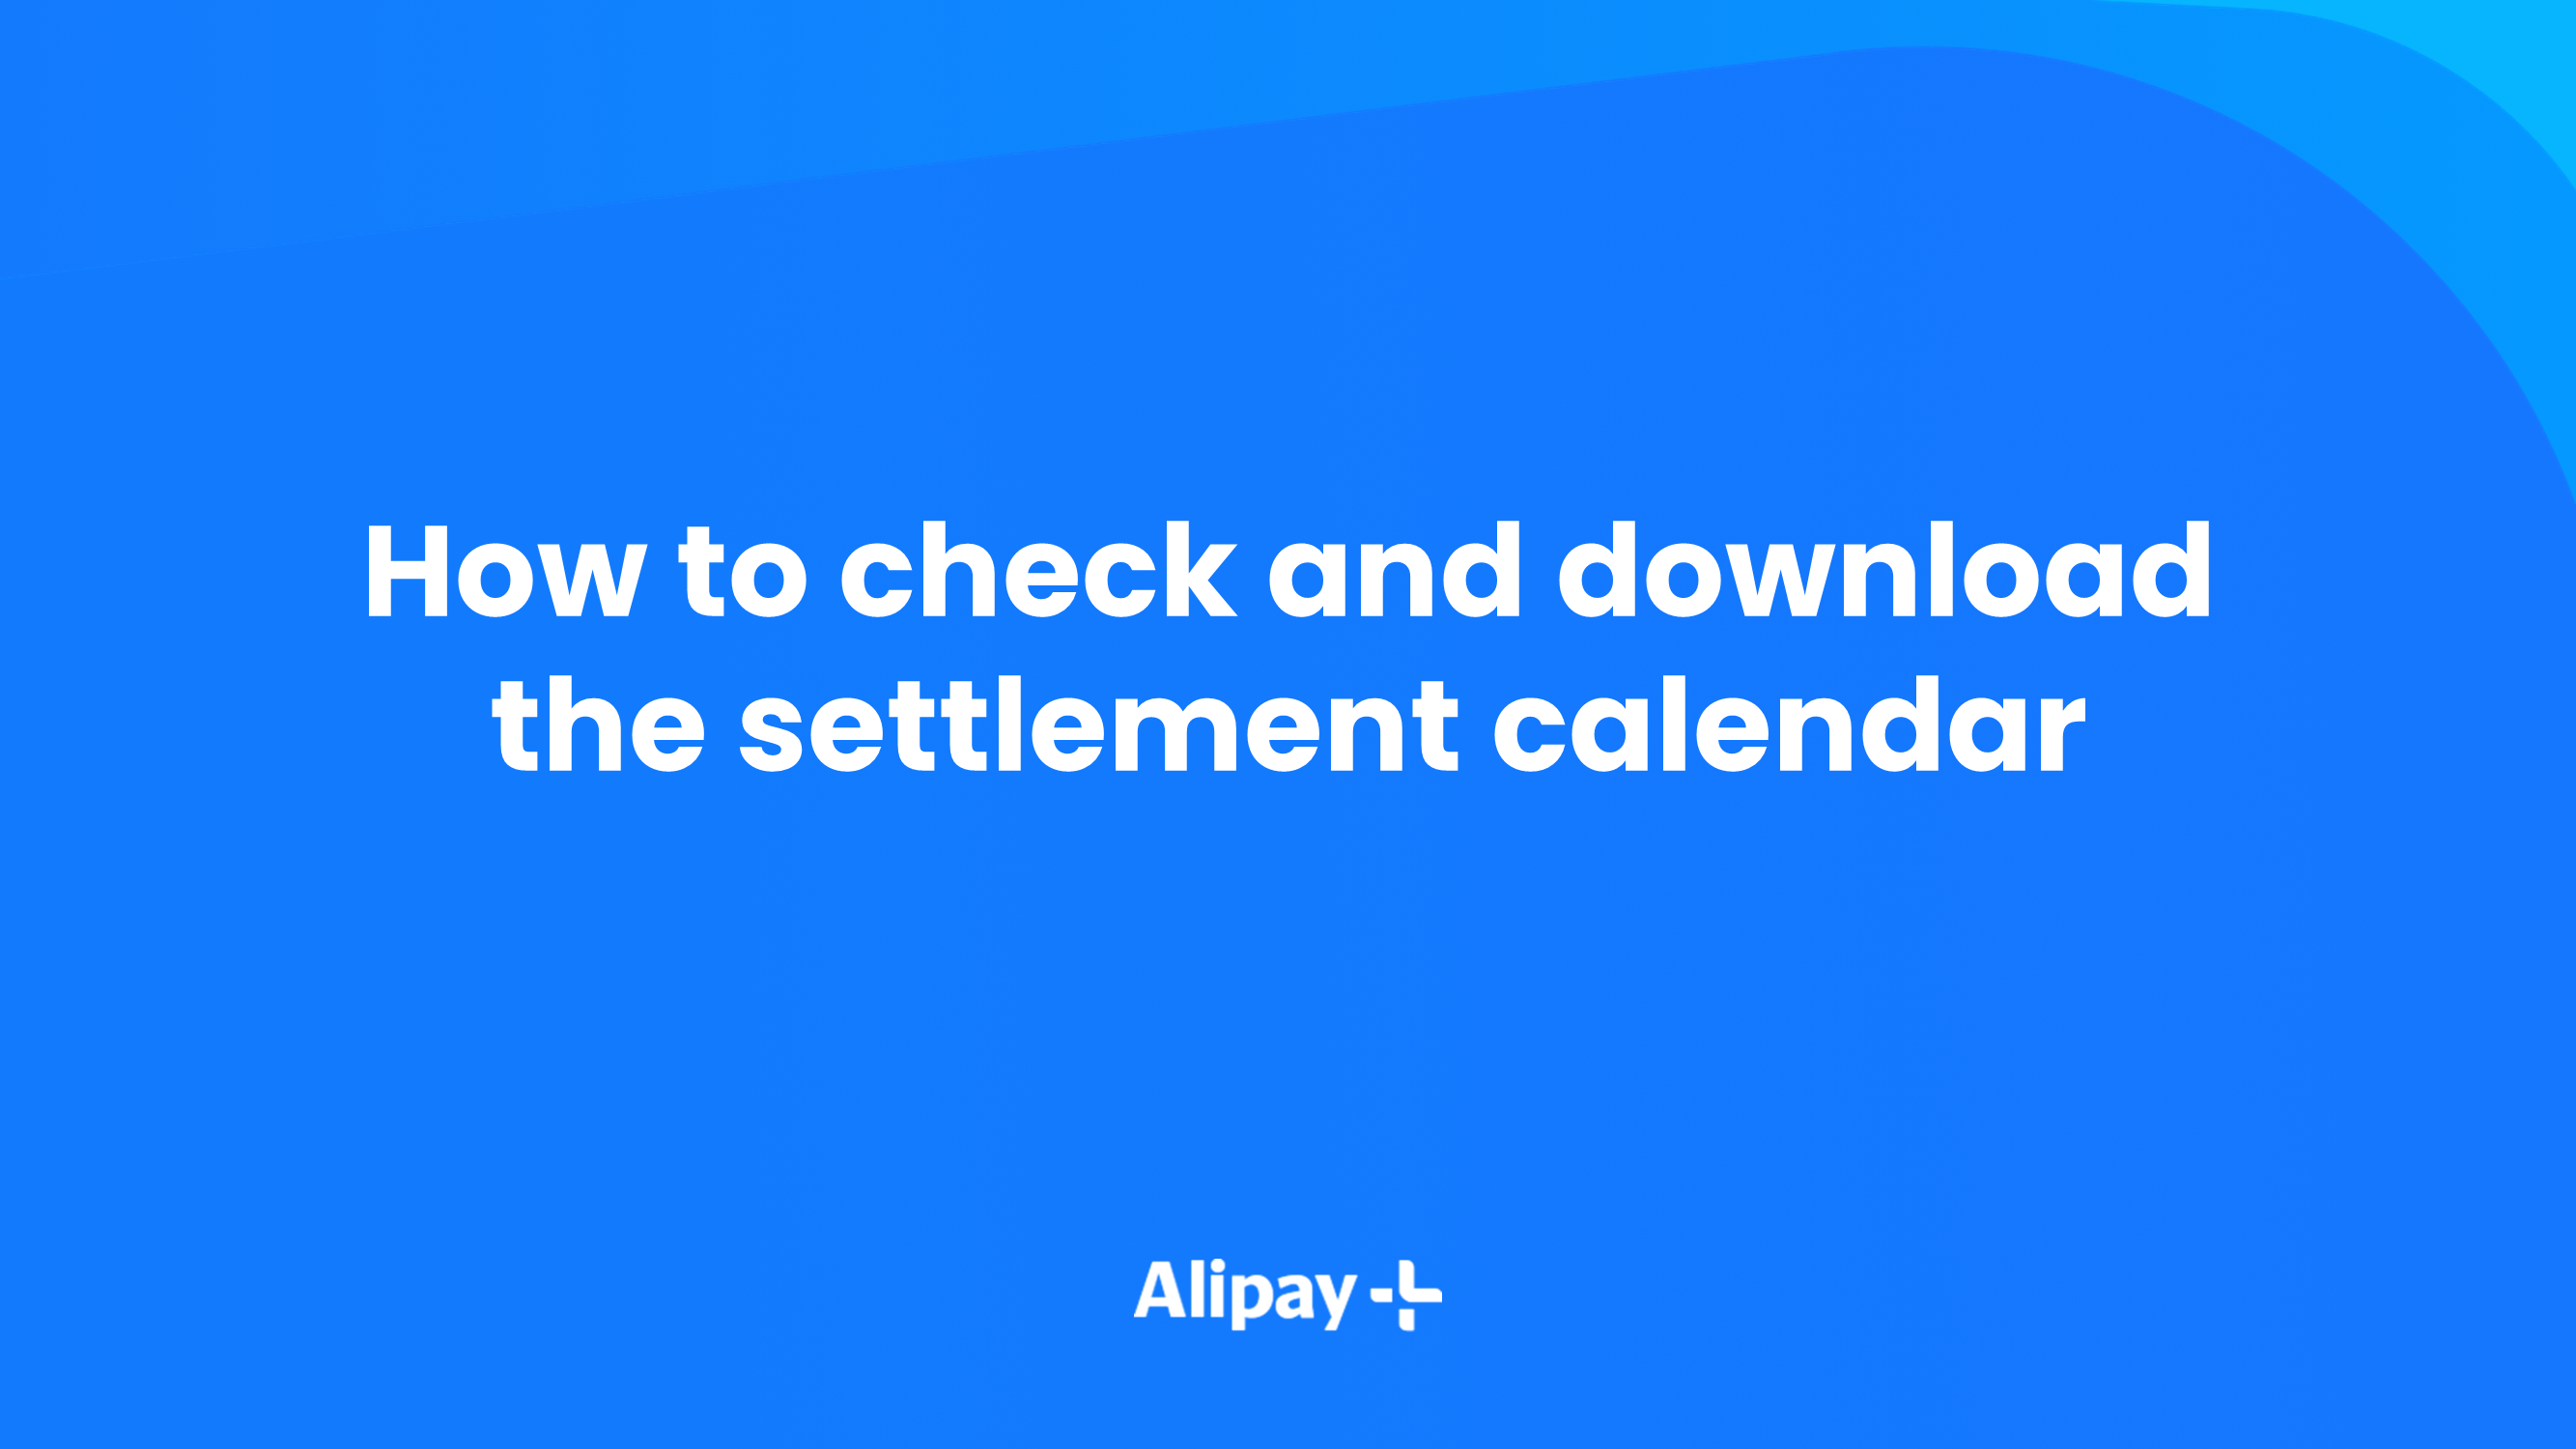 How to check and download the settlement calendar